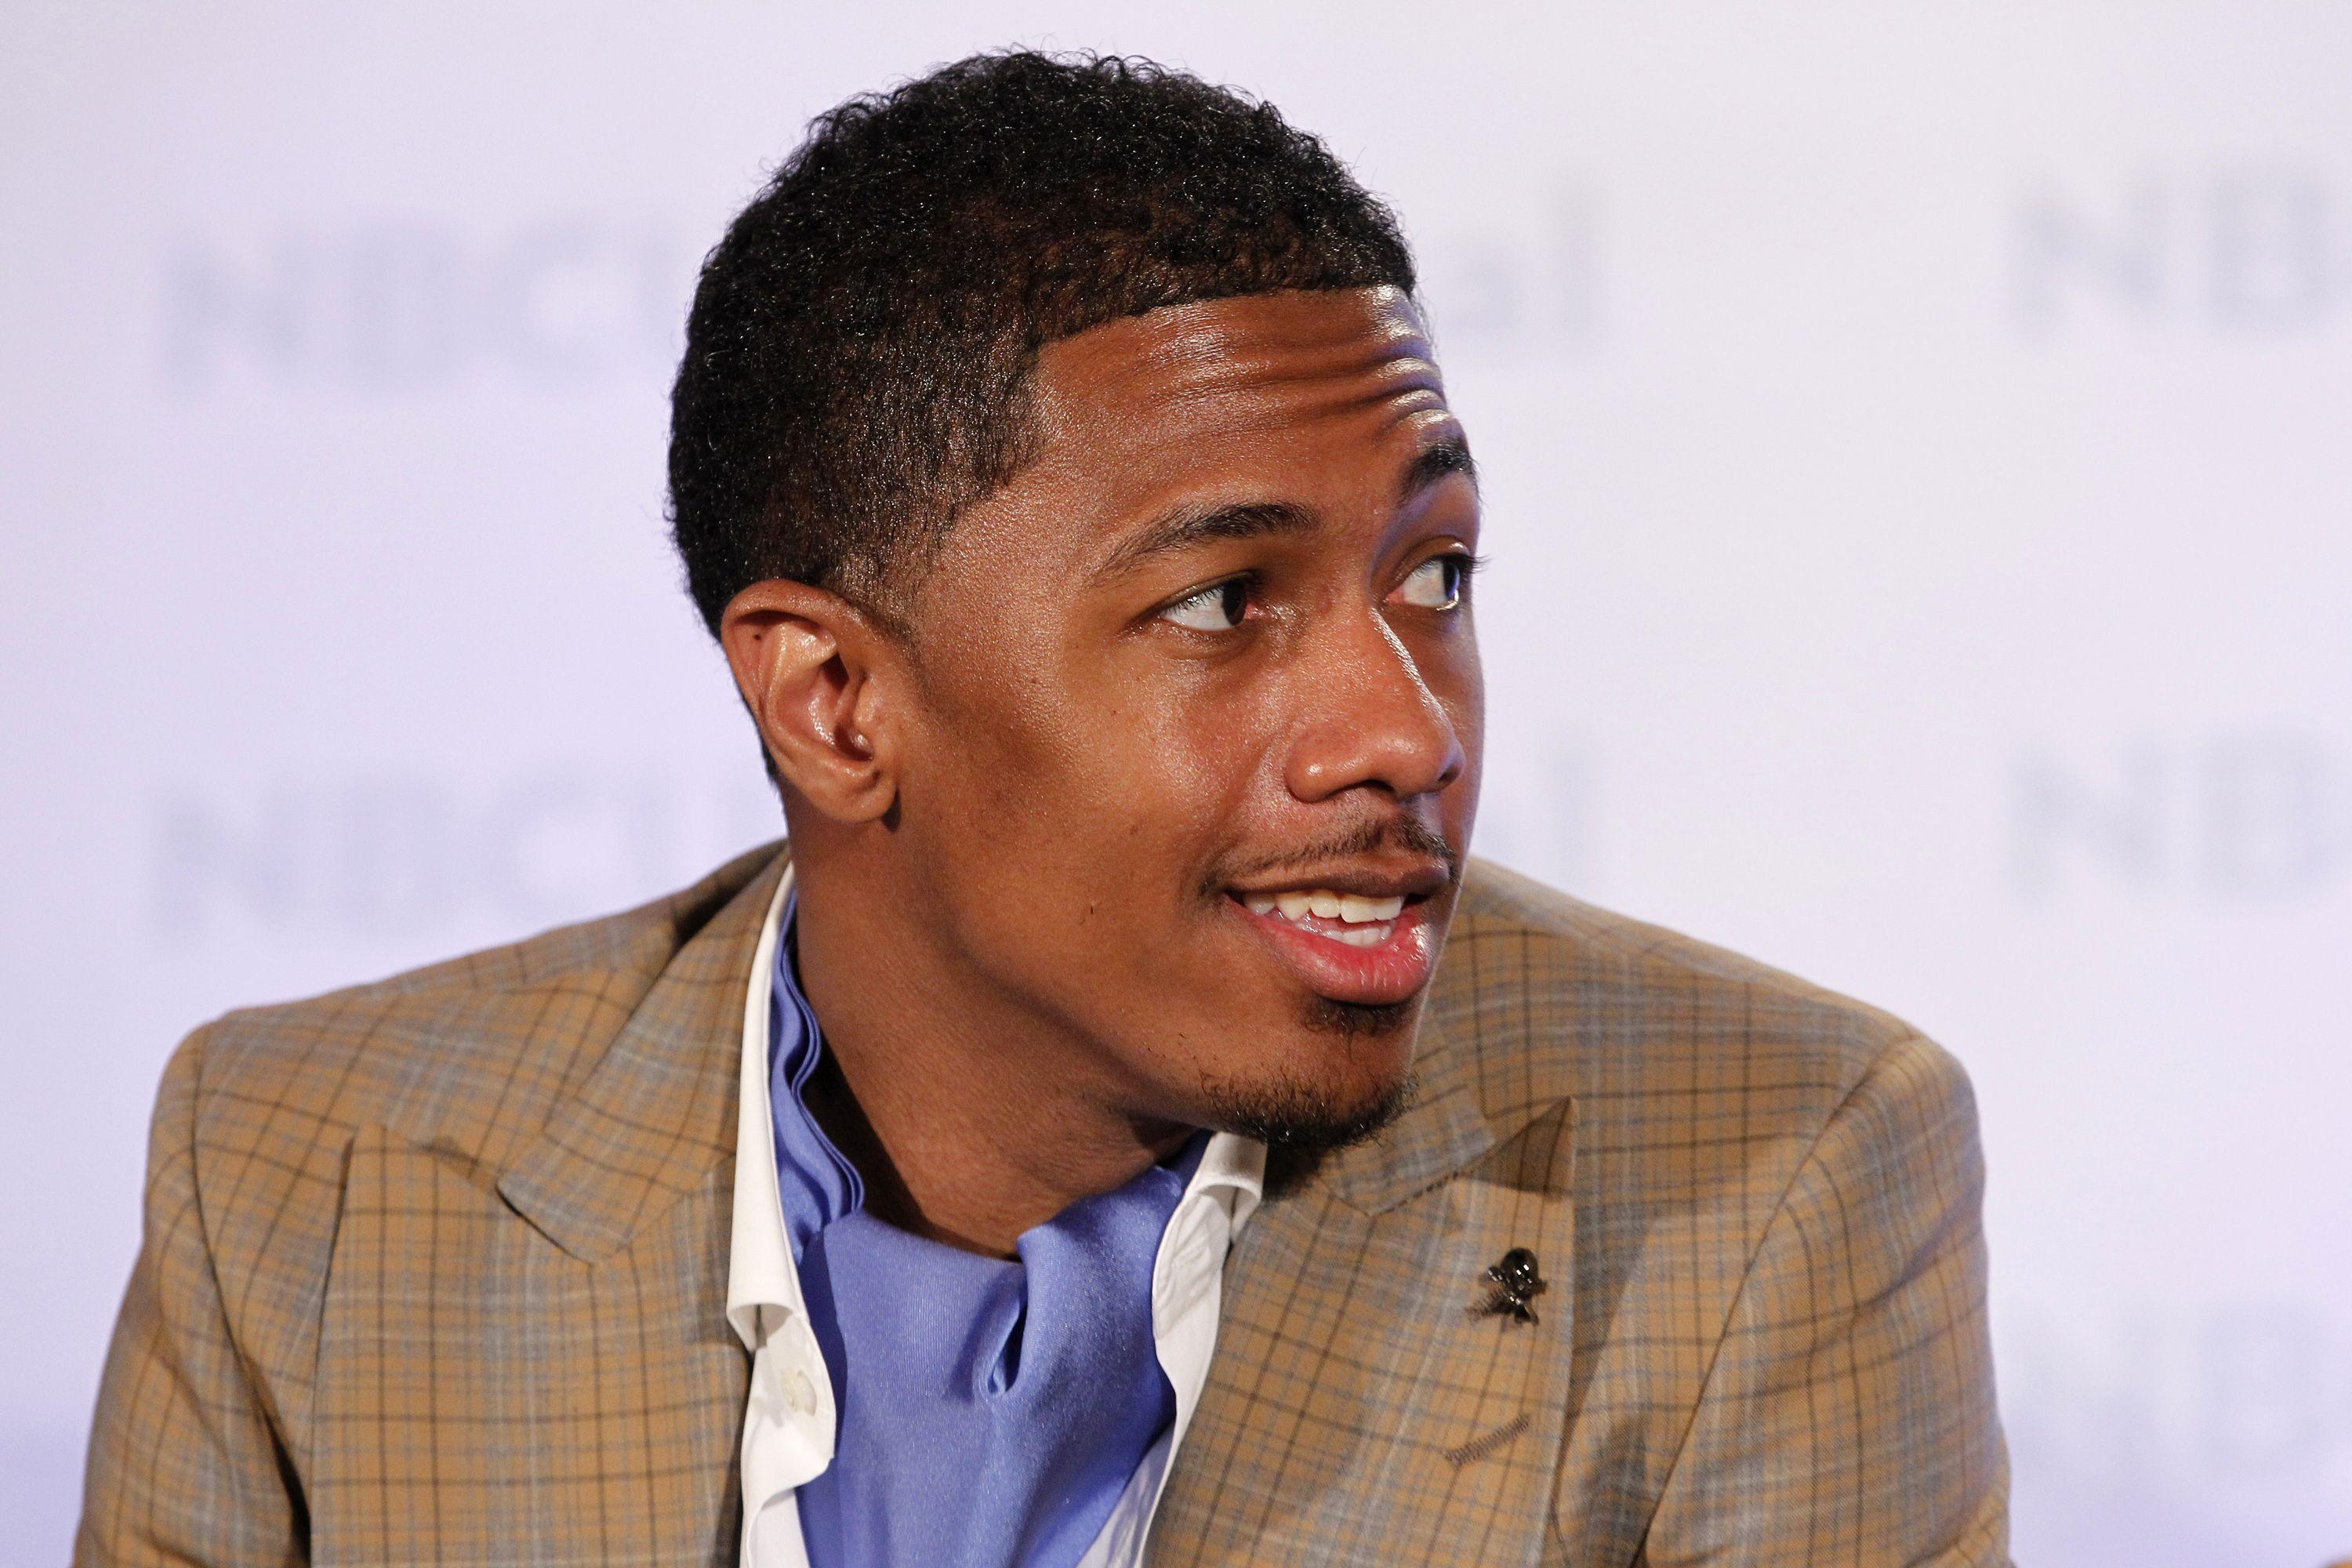 Nick Cannon Wallpaper High Quality